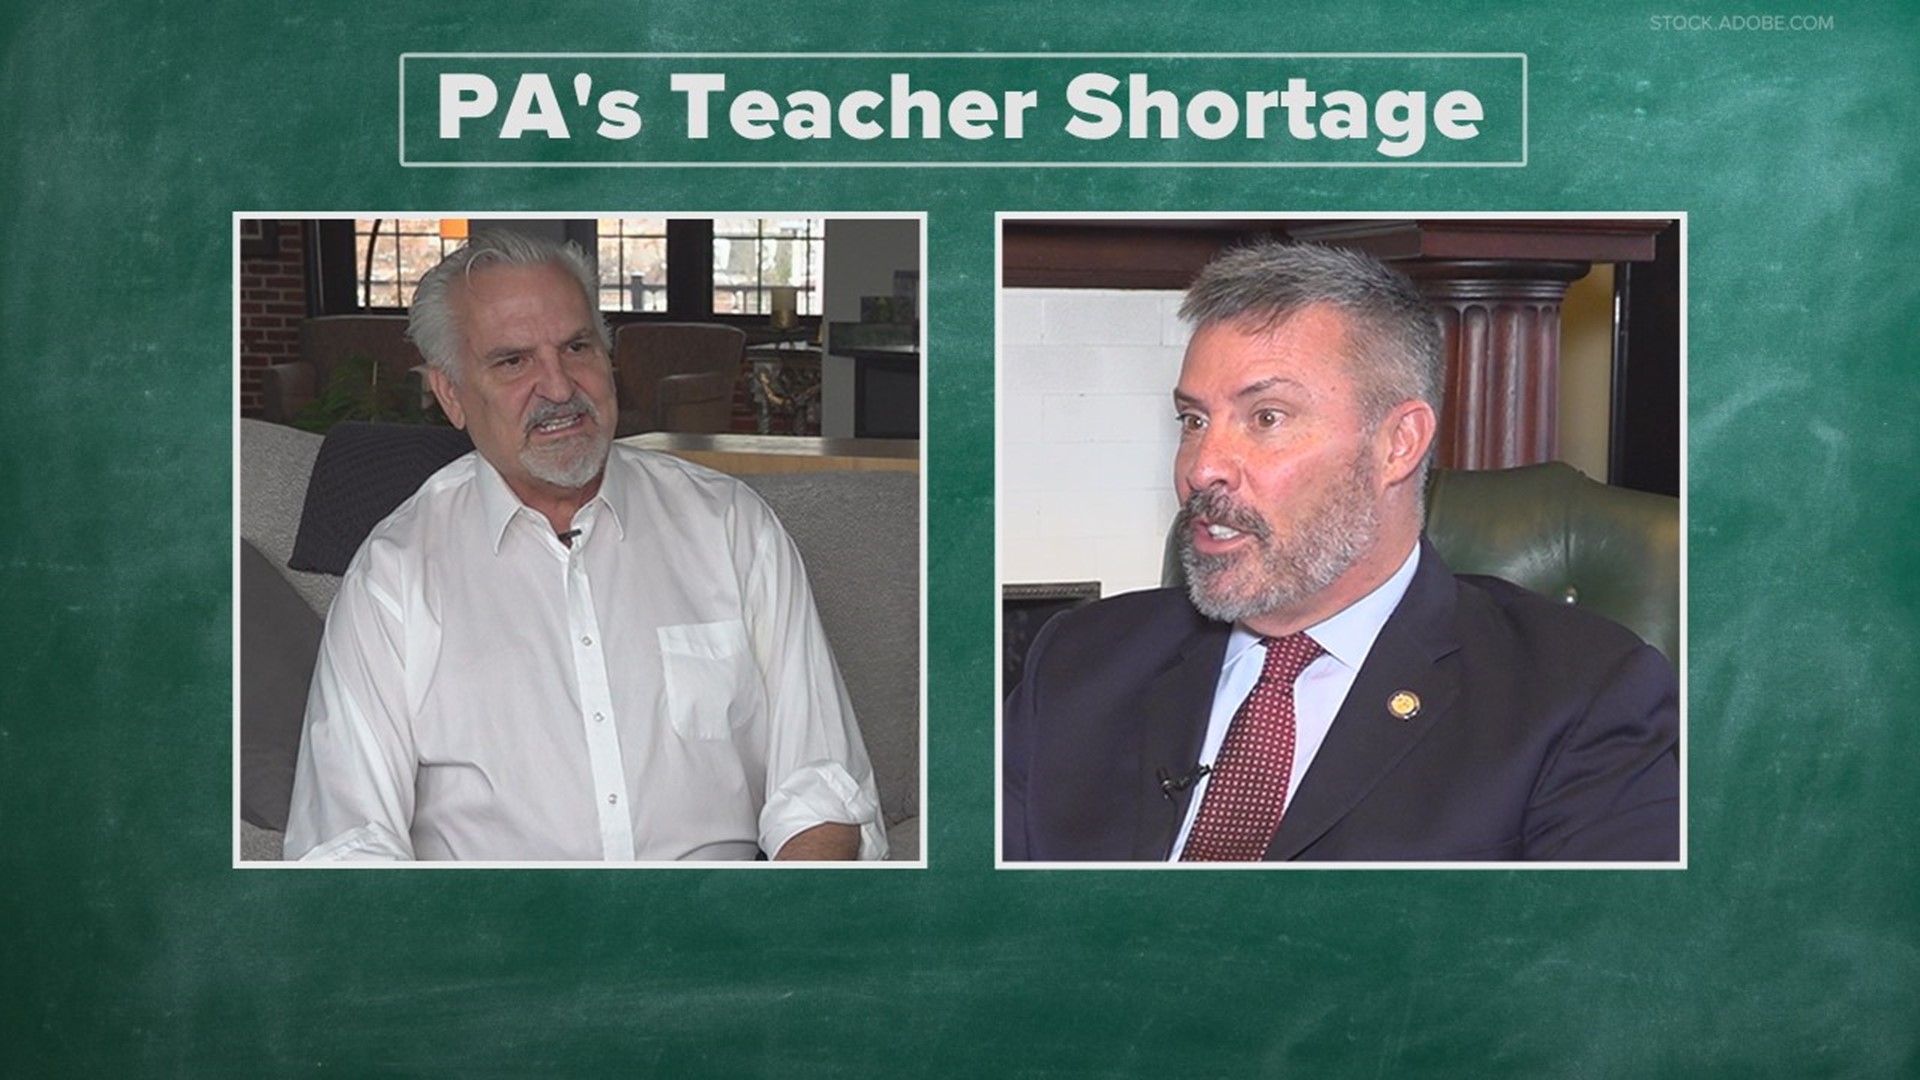 Pennsylvania schools are still grappling with a teacher shortage that’s prompting action from lawmakers, but the divide in Harrisburg could prolong the issue.